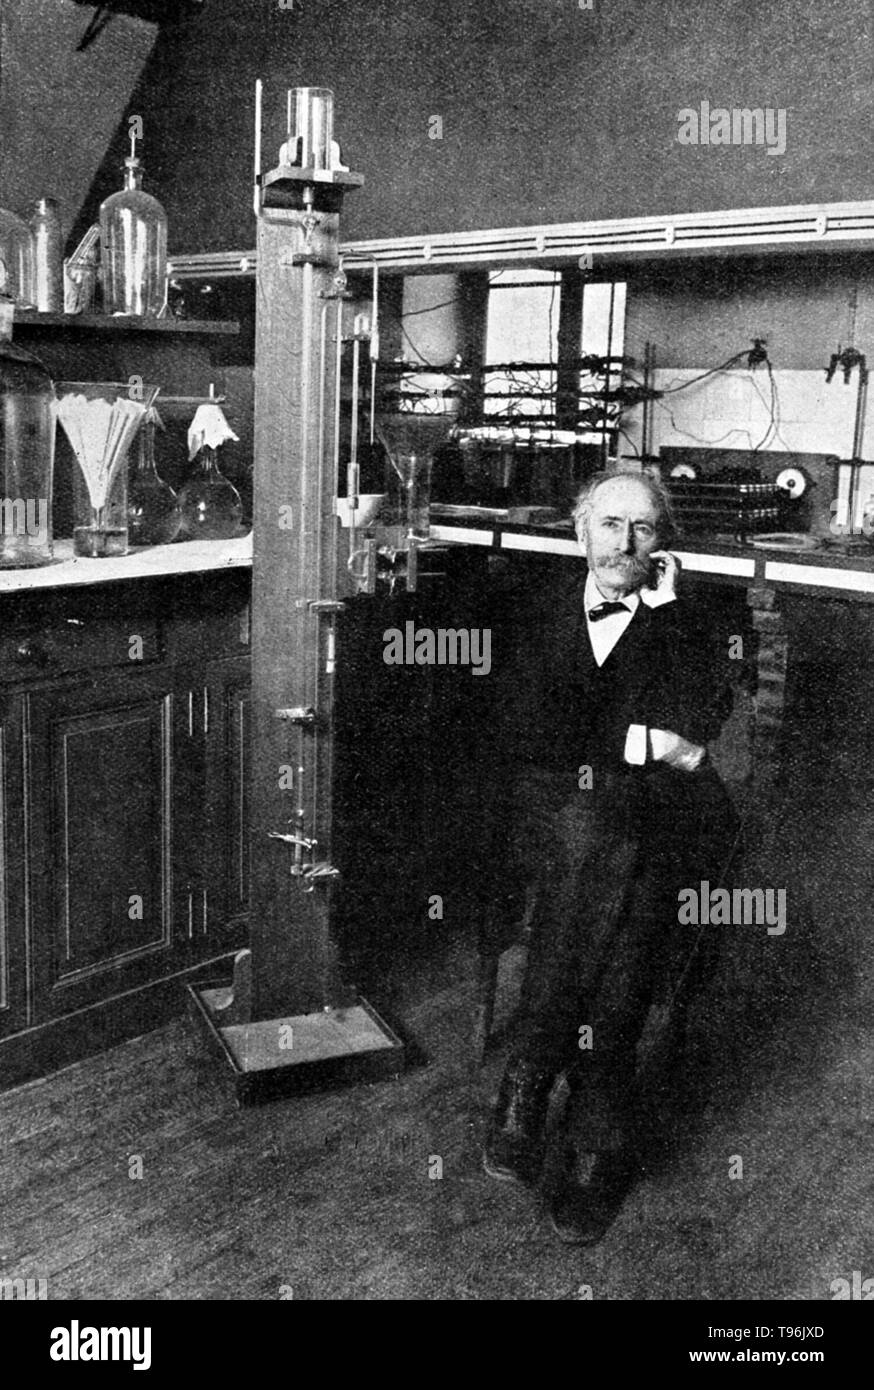 Berthelot in seated in his laboratory. Pierre Eugène Marcellin Berthelot (October 25, 1827 - March 18, 1907) was a French chemist and politician noted for the Thomsen-Berthelot principle of thermochemistry which argued that all chemical changes are accompanied by the production of heat and that processes which occur will be ones in which the most heat is produced. He synthesized many organic compounds from inorganic substances and disproved the theory of vitalism. Stock Photo